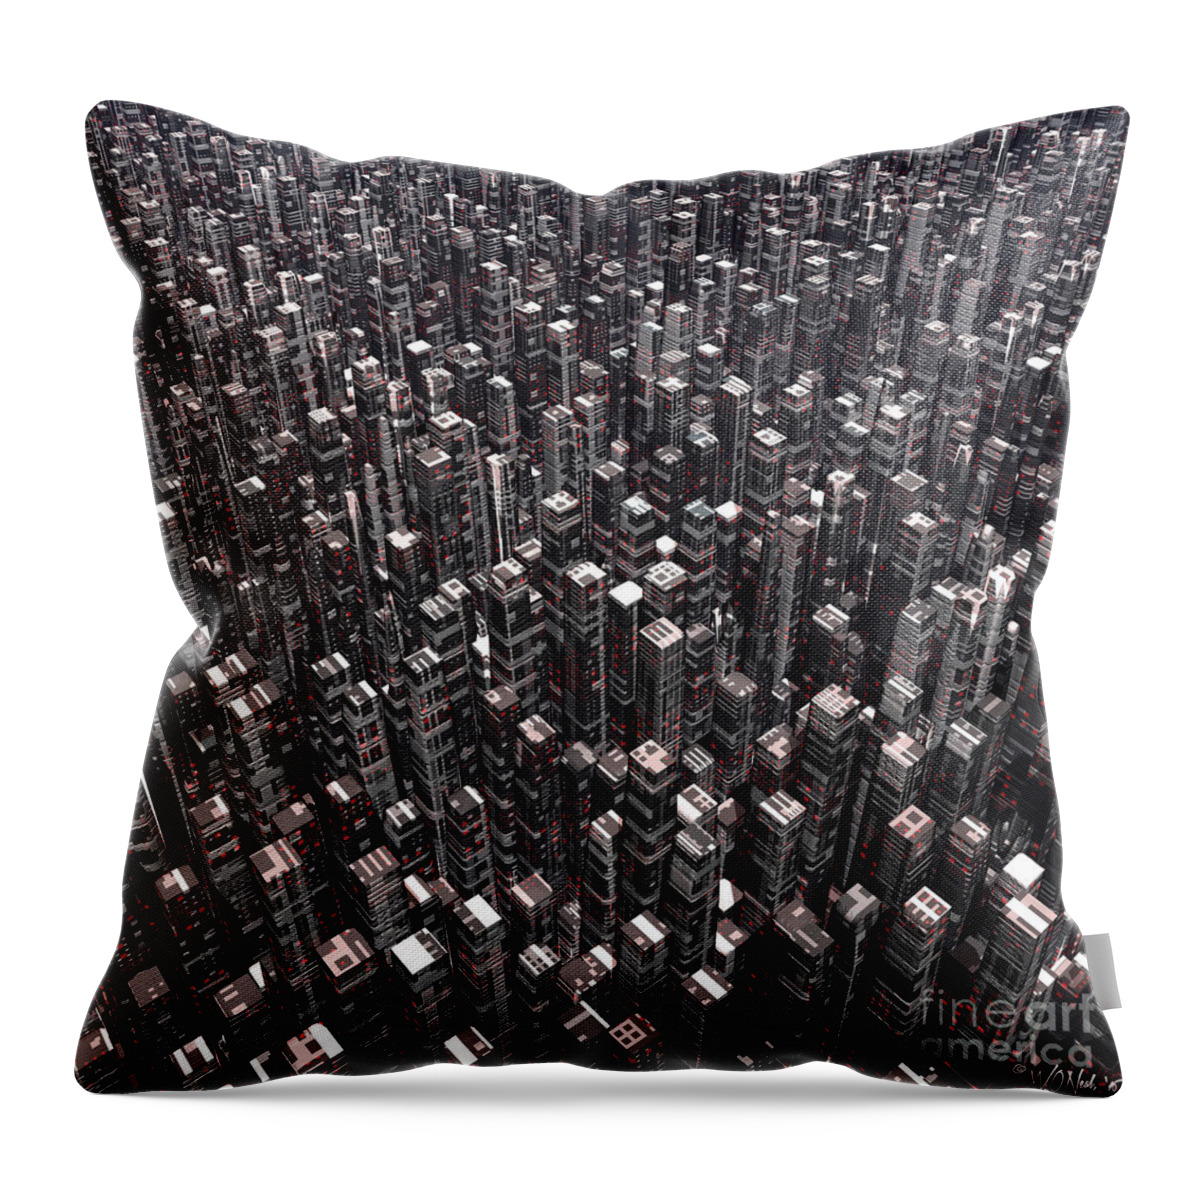 Buildings Throw Pillow featuring the digital art Megalopolis by Walter Neal